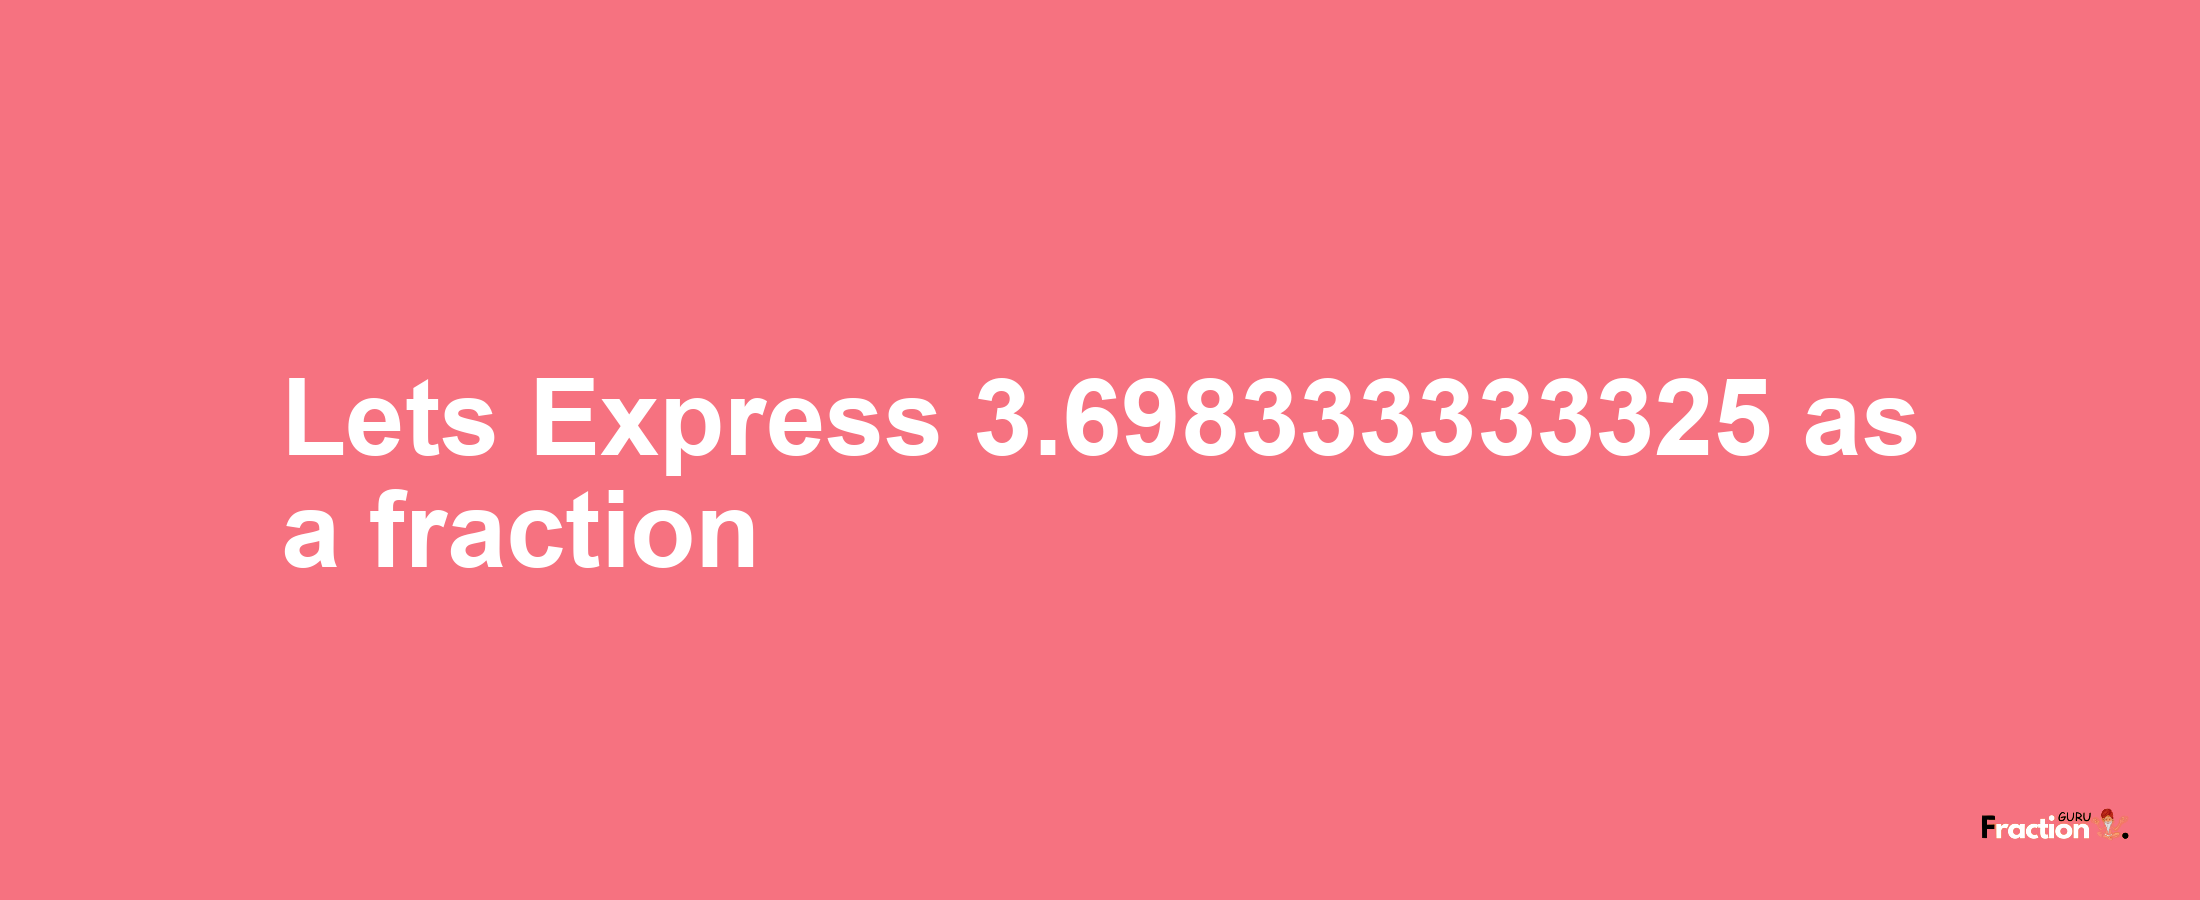 Lets Express 3.698333333325 as afraction